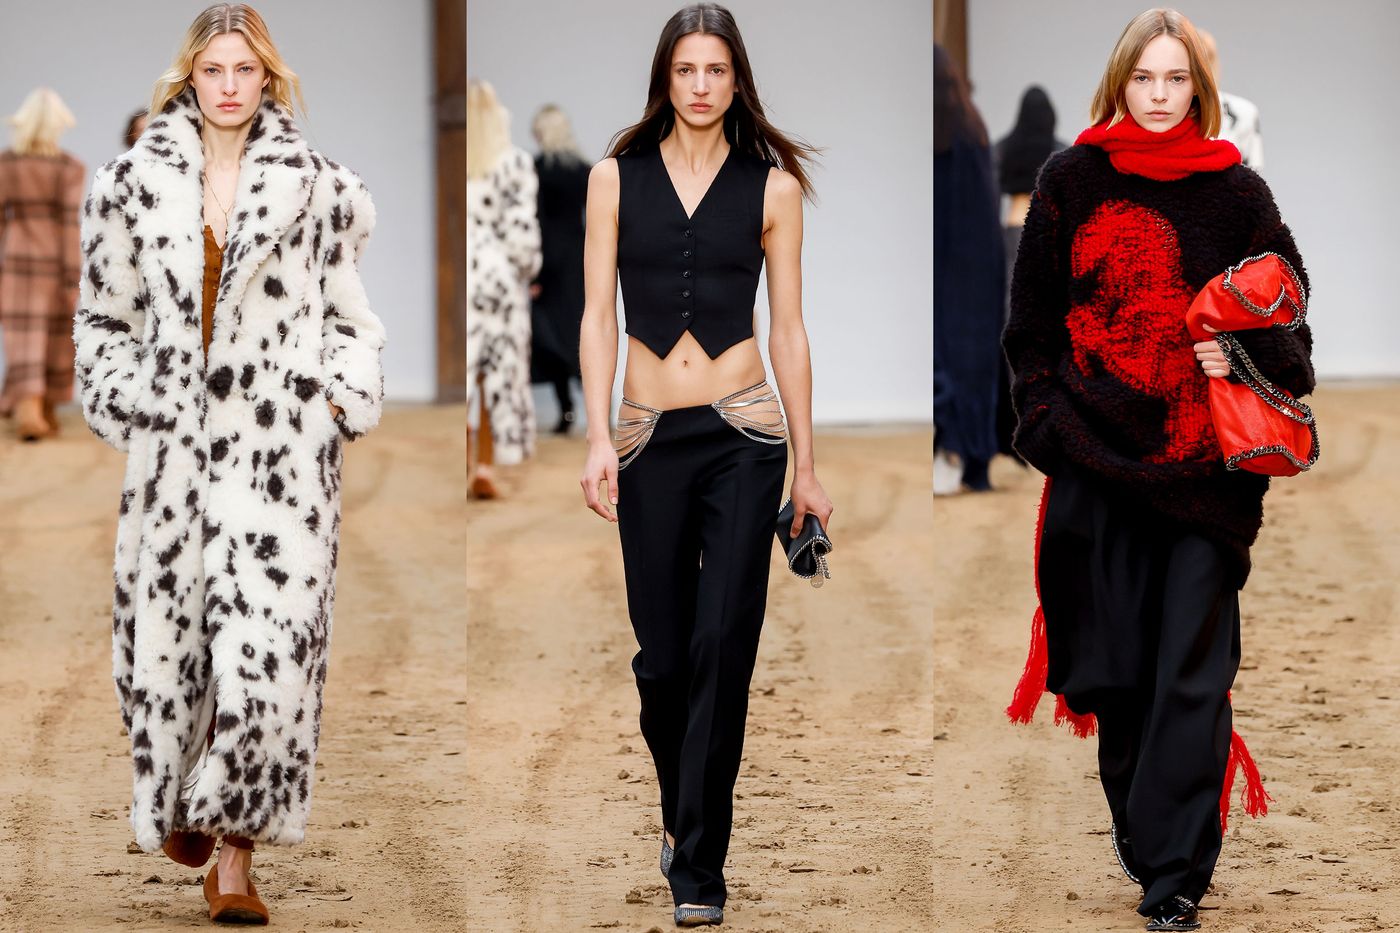 A Terrific Collection From Stella McCartney